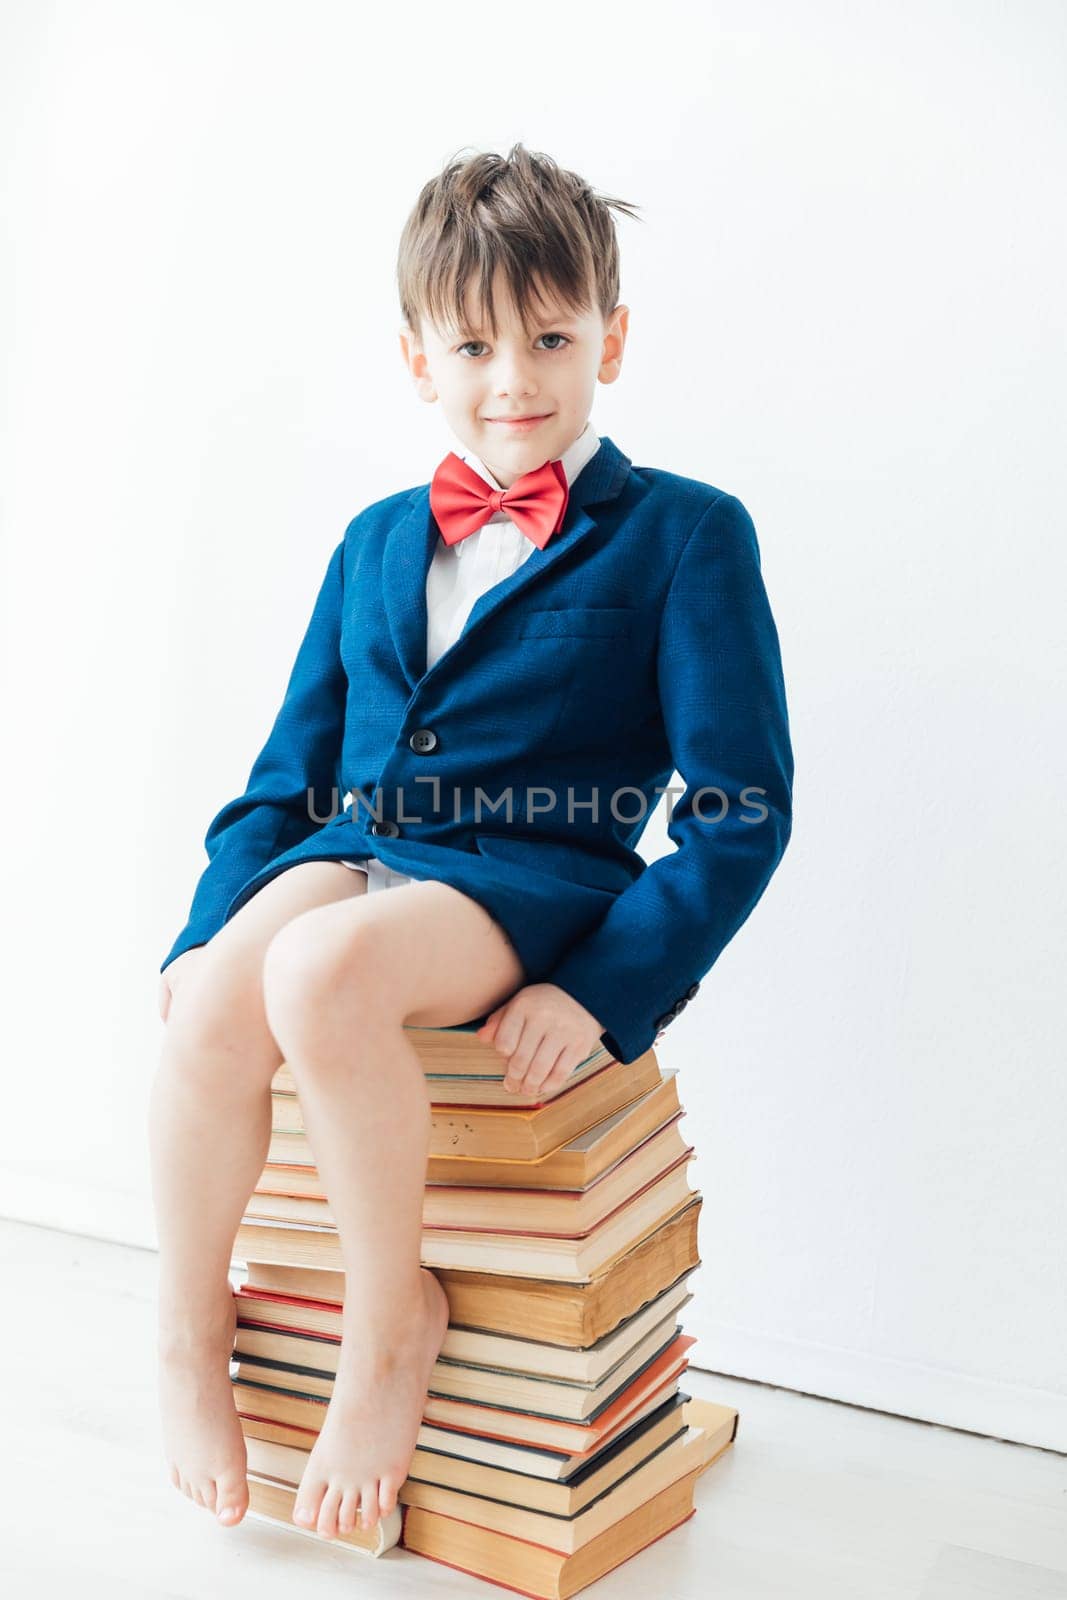 Boy in jacket sitting on a stack of books by Simakov